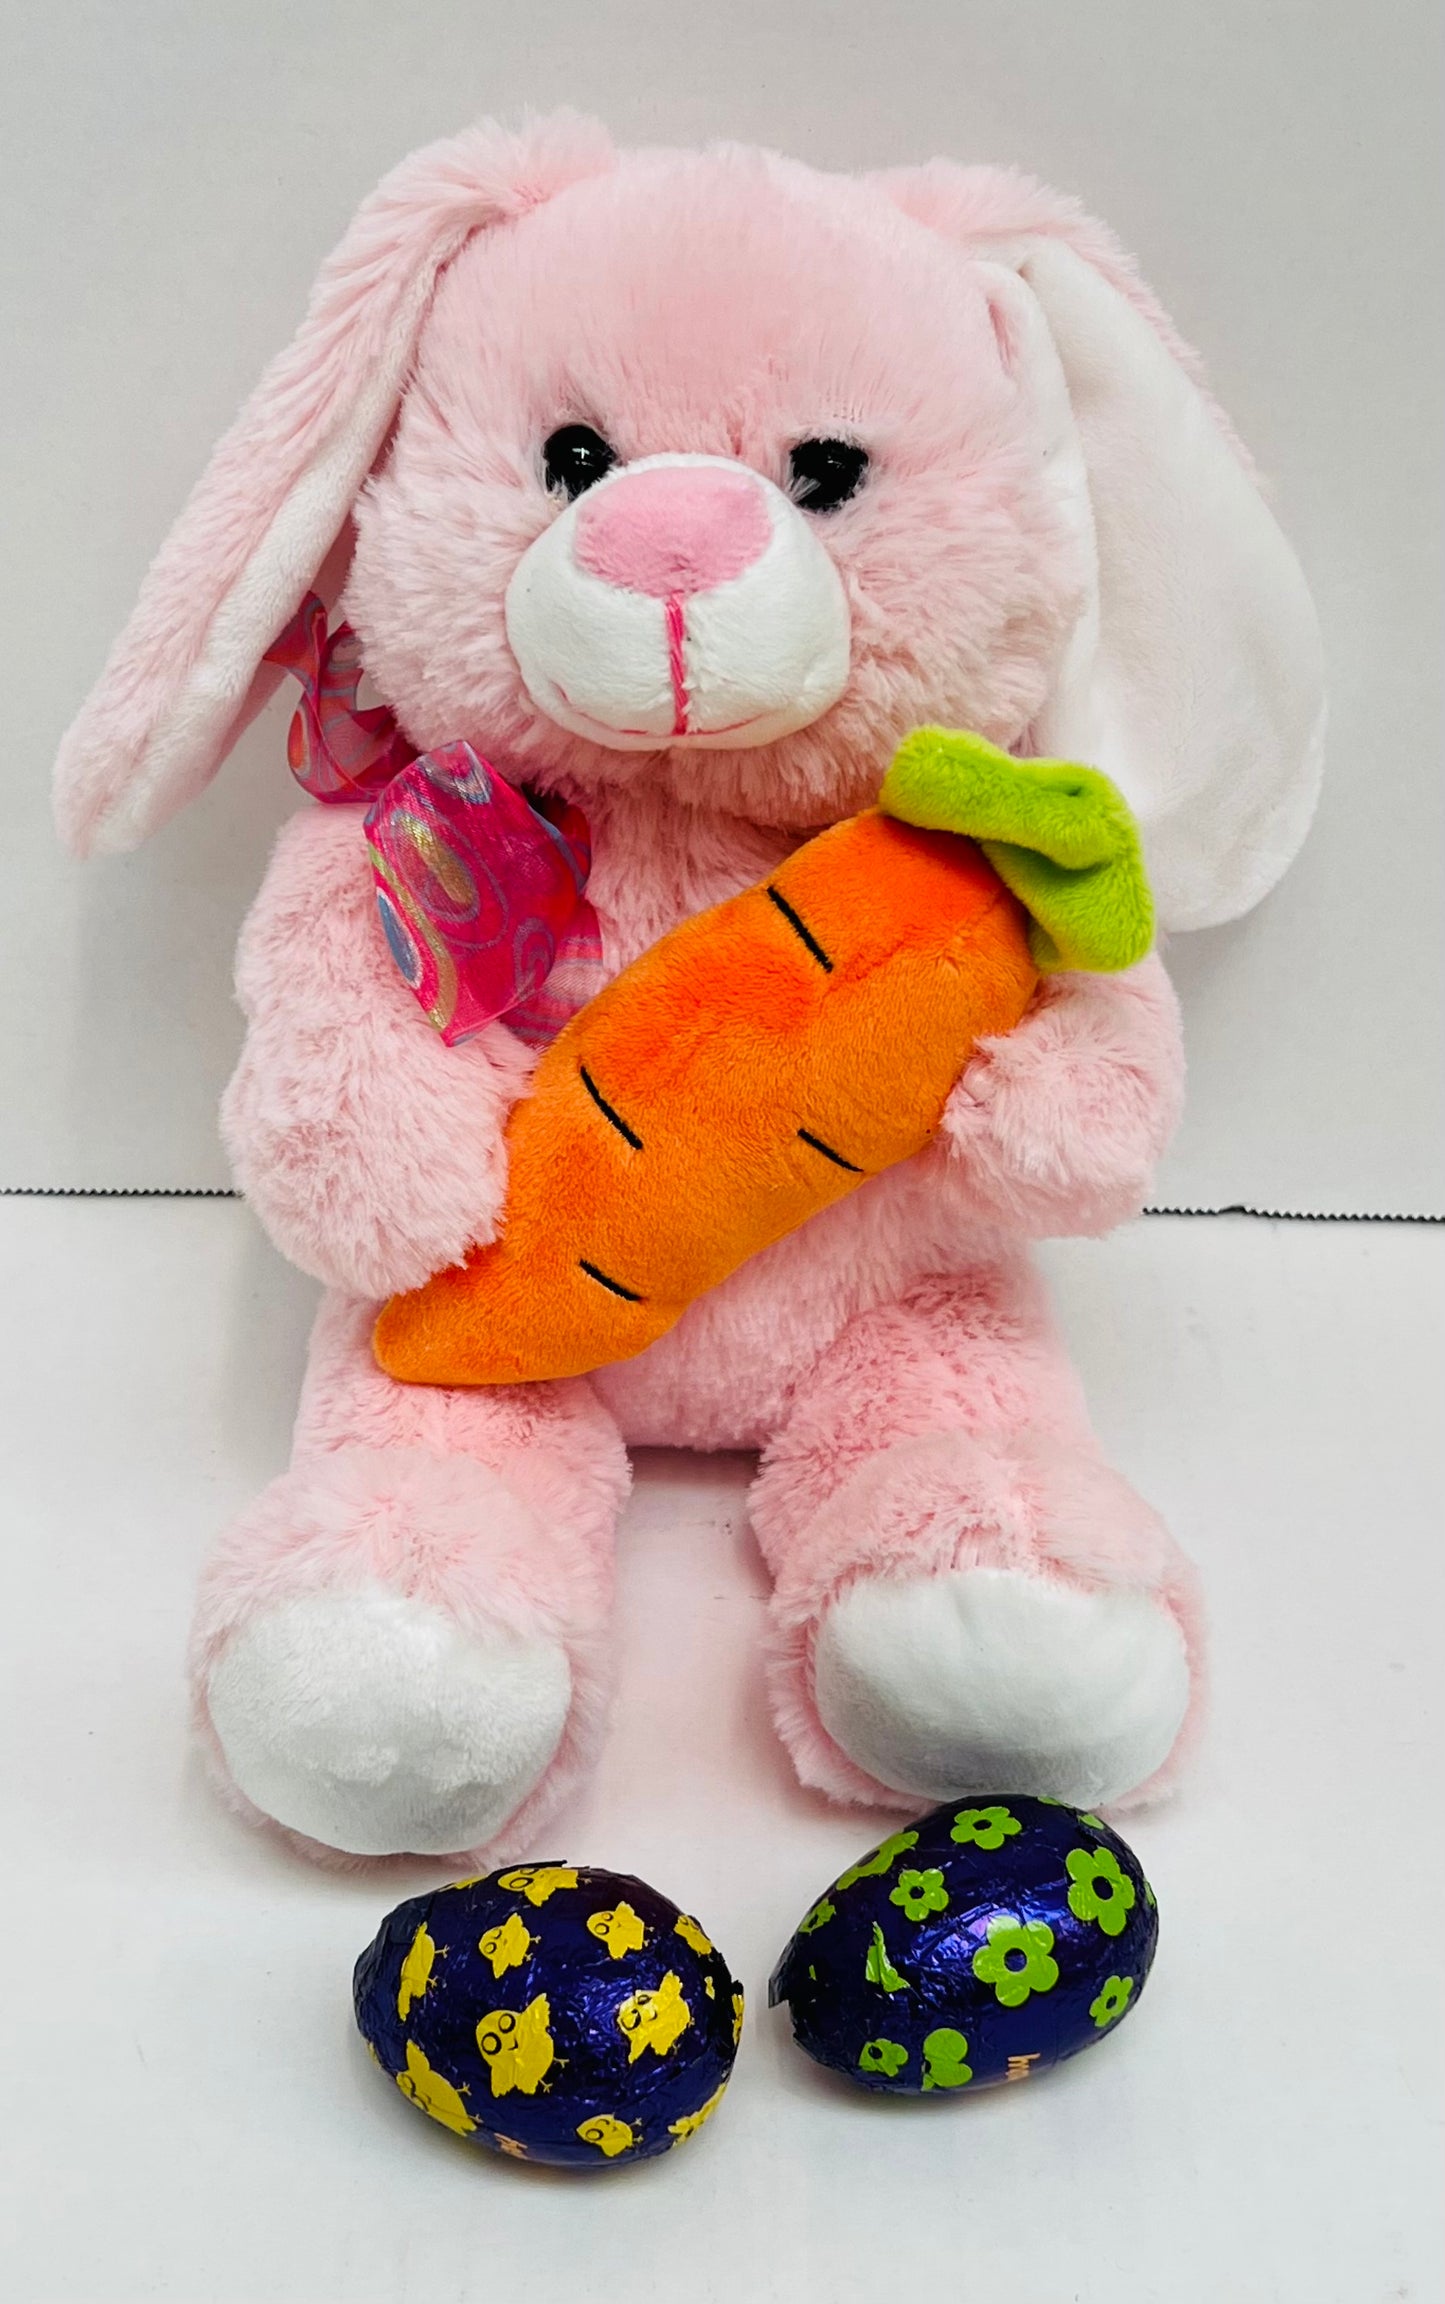 * Easter Plushes